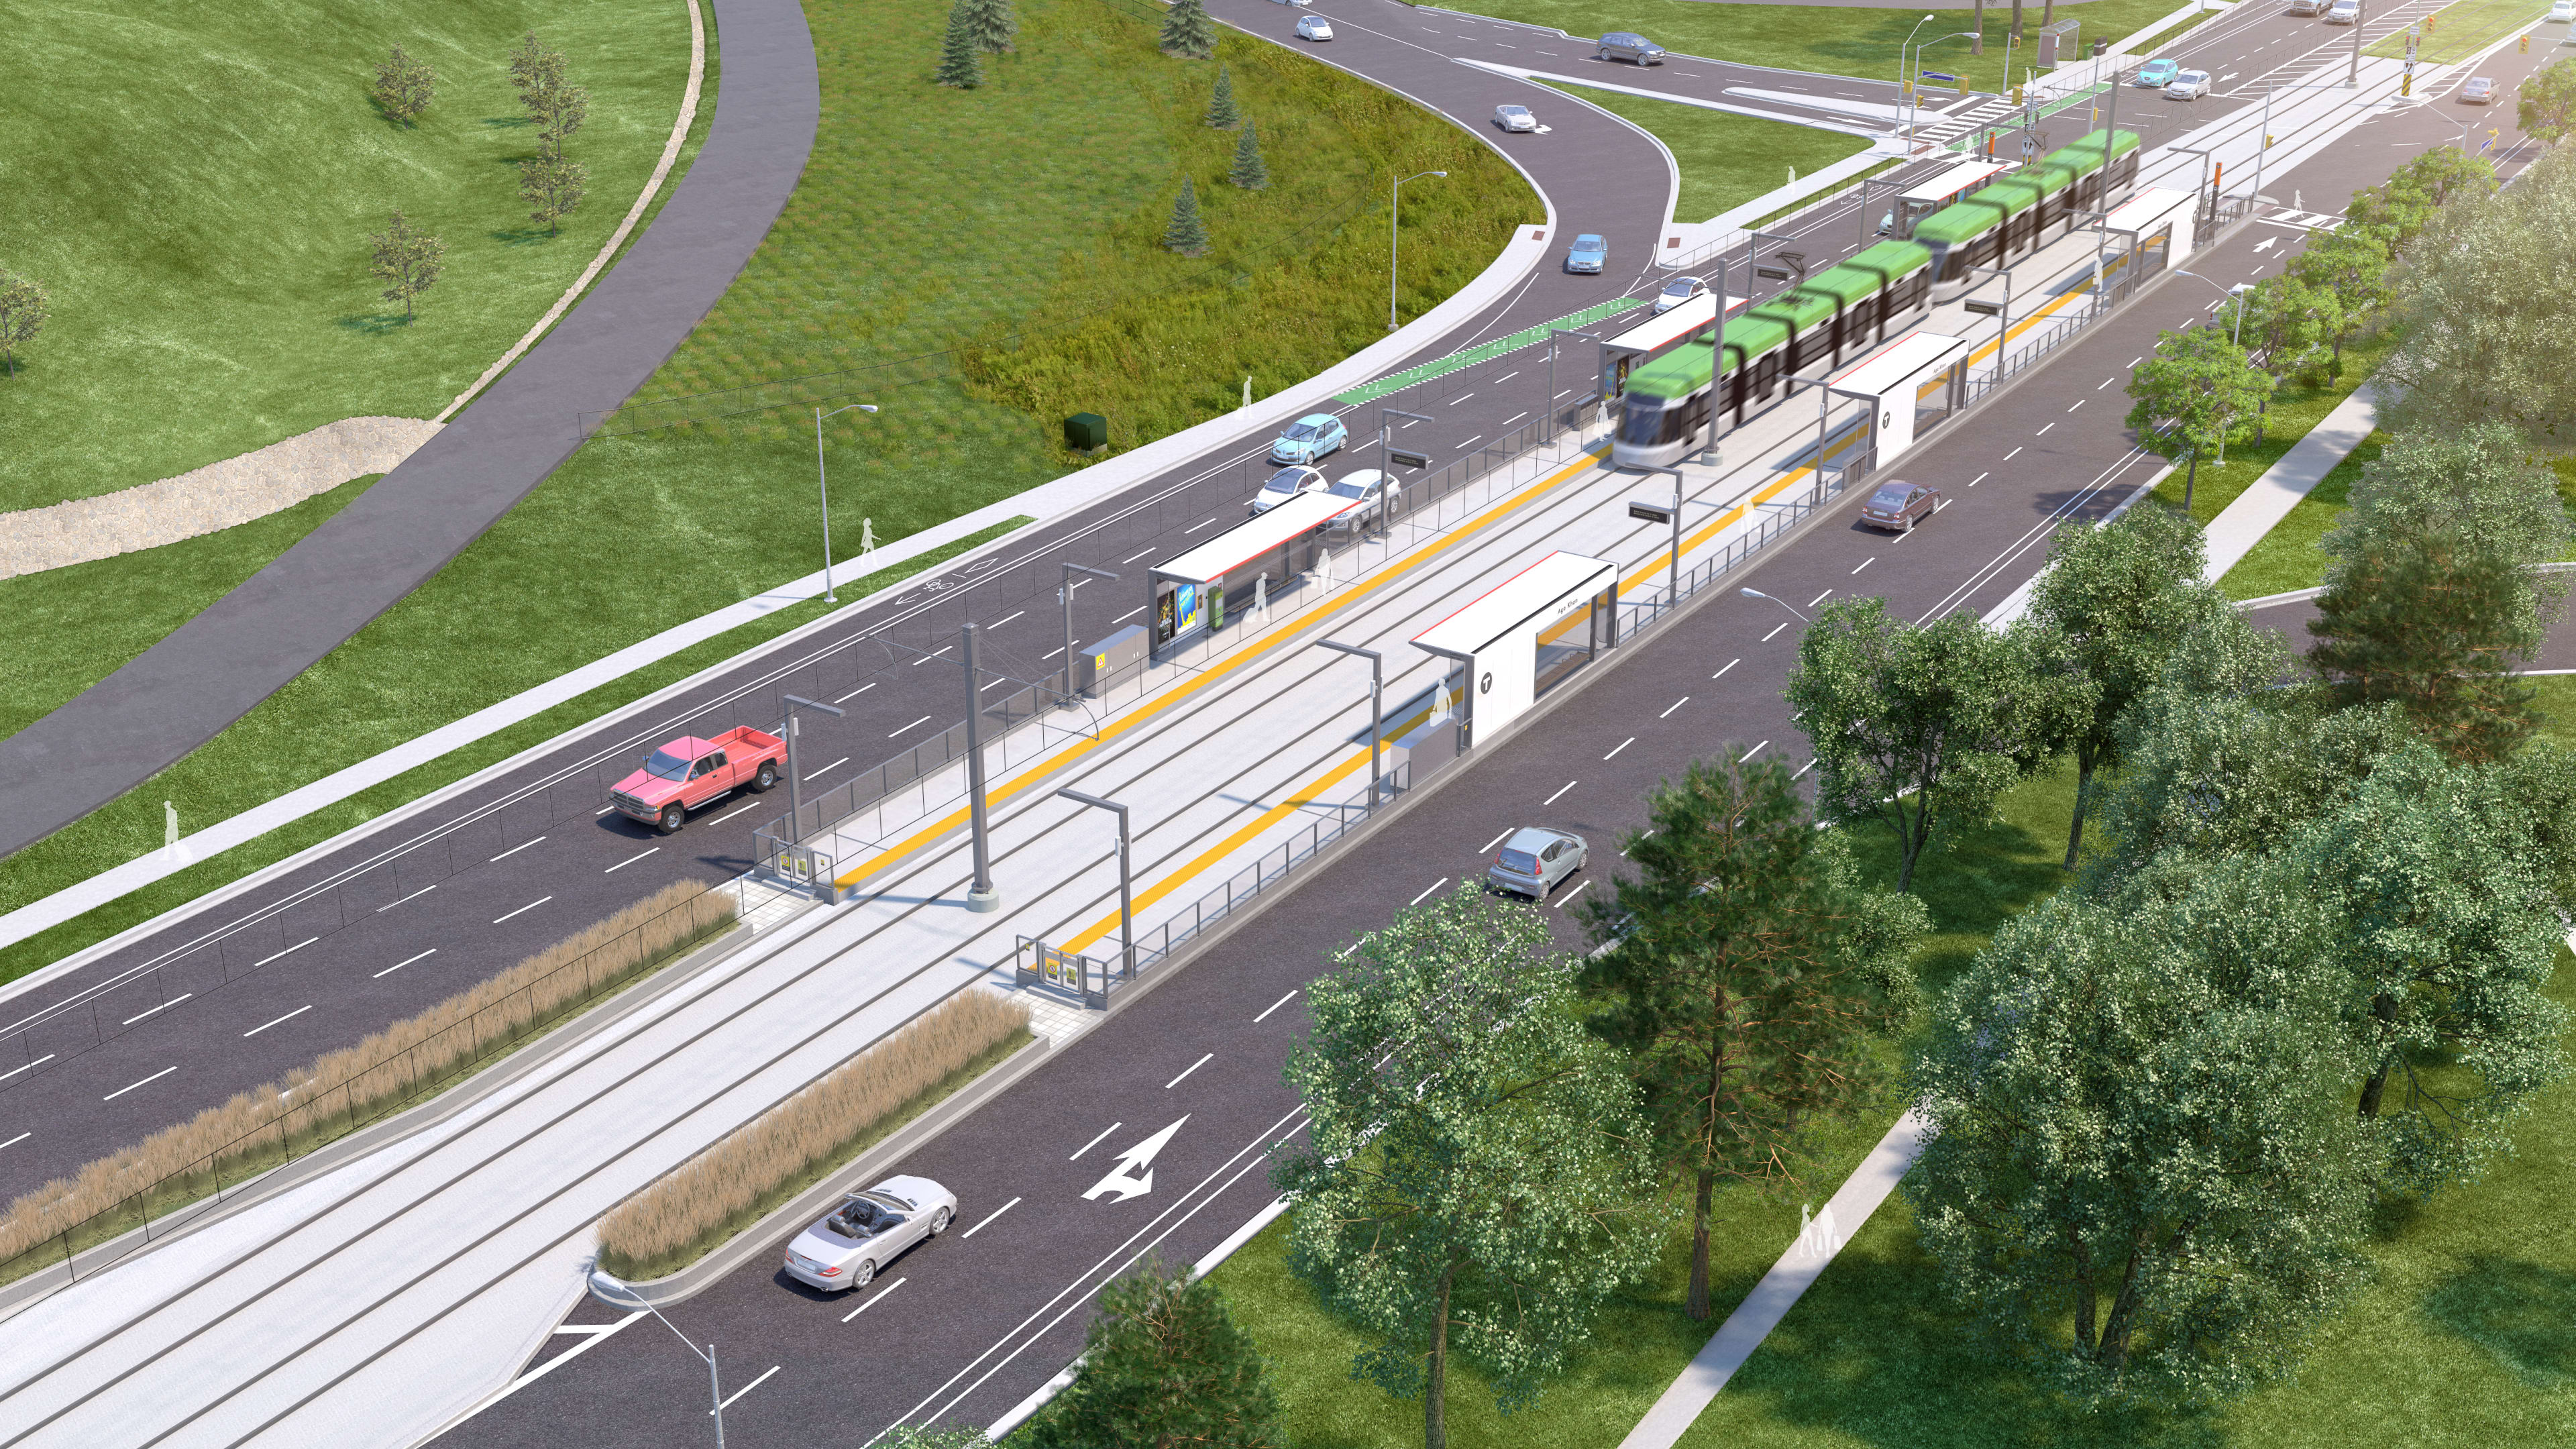 An artist concept shows a ground-level stop, with a light rail vehicle pulling in.